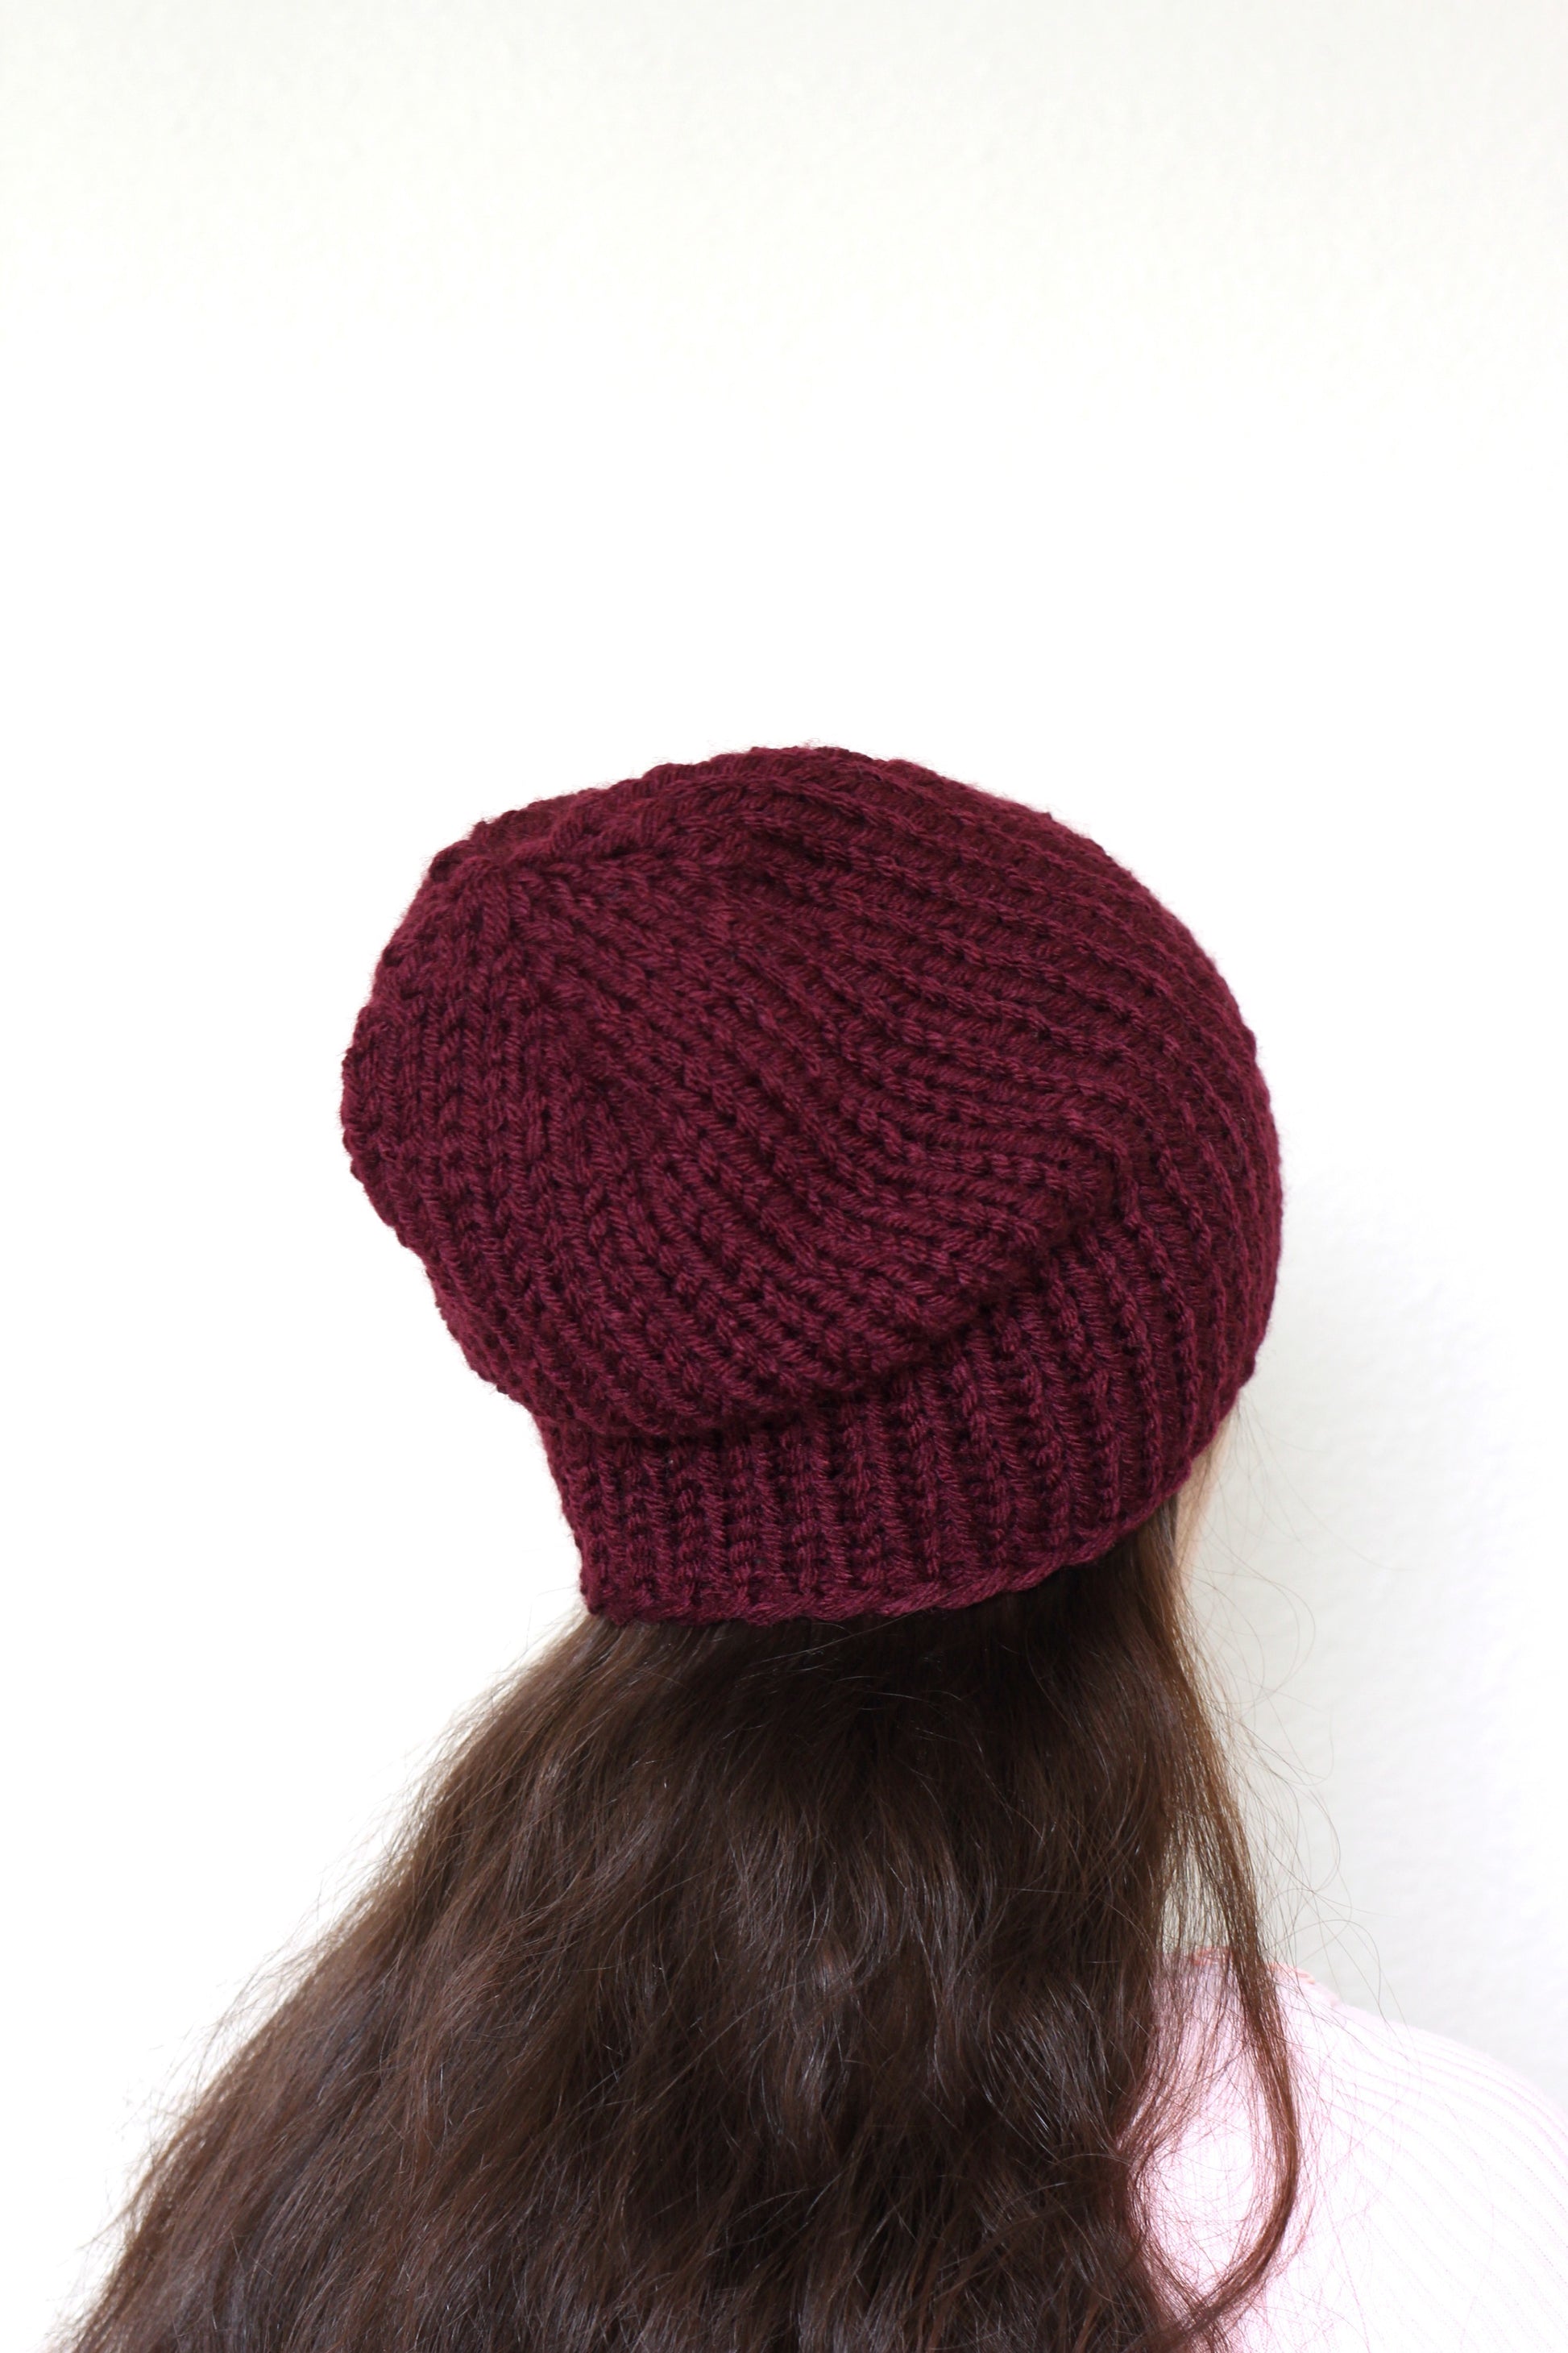 Beanie hat, knit hat, slouchy hat, knit beanie in burgundy color